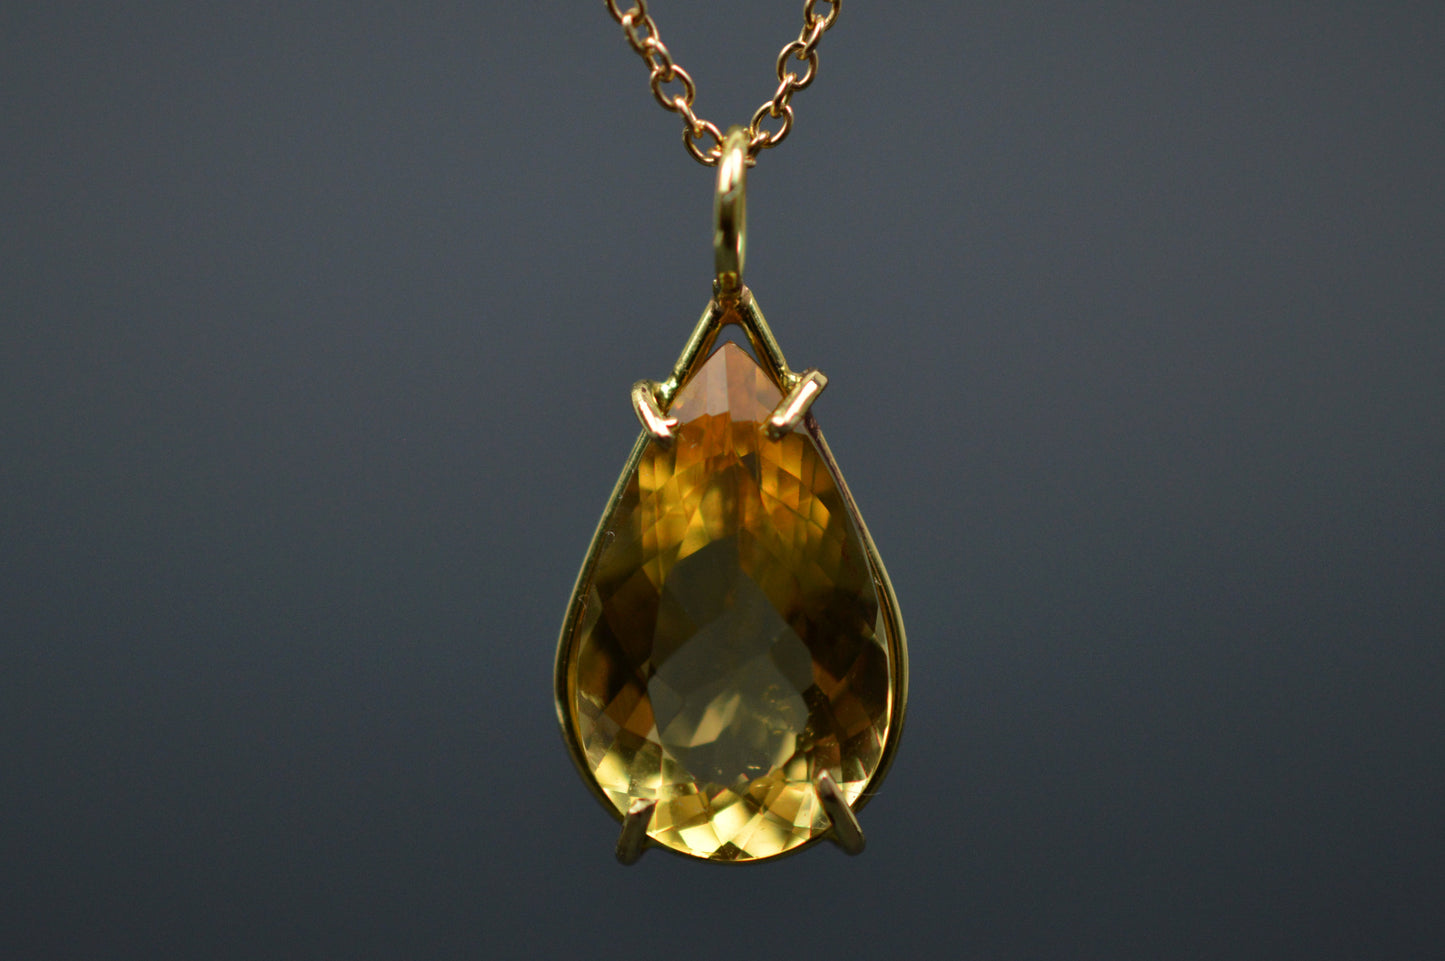 Beryl and gold pendant necklace